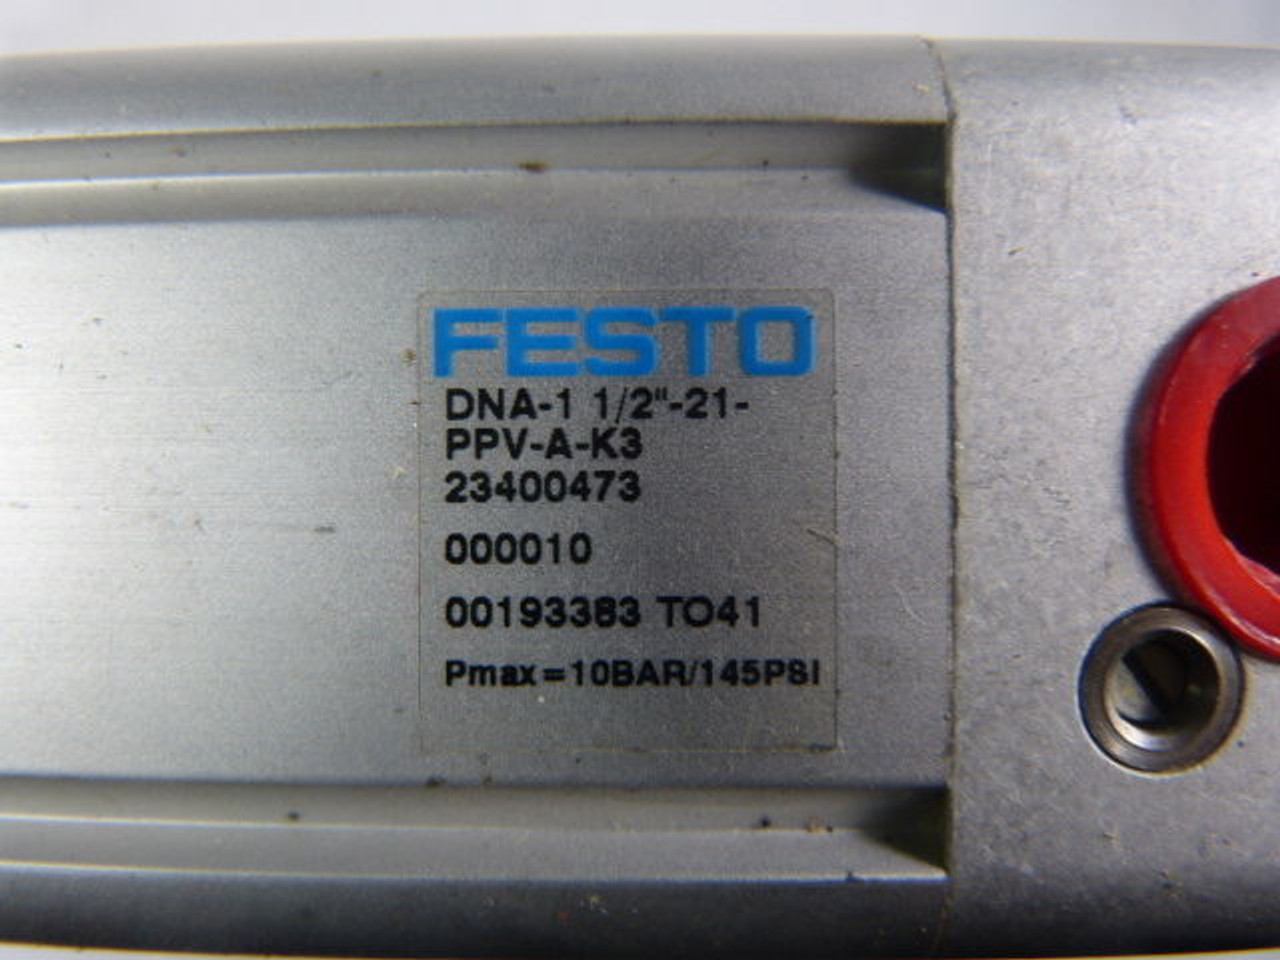 Festo DNA-1-1/2-21-PPV-A-K3 Pneumatic Cylinder 10 Bar 145PSI USED